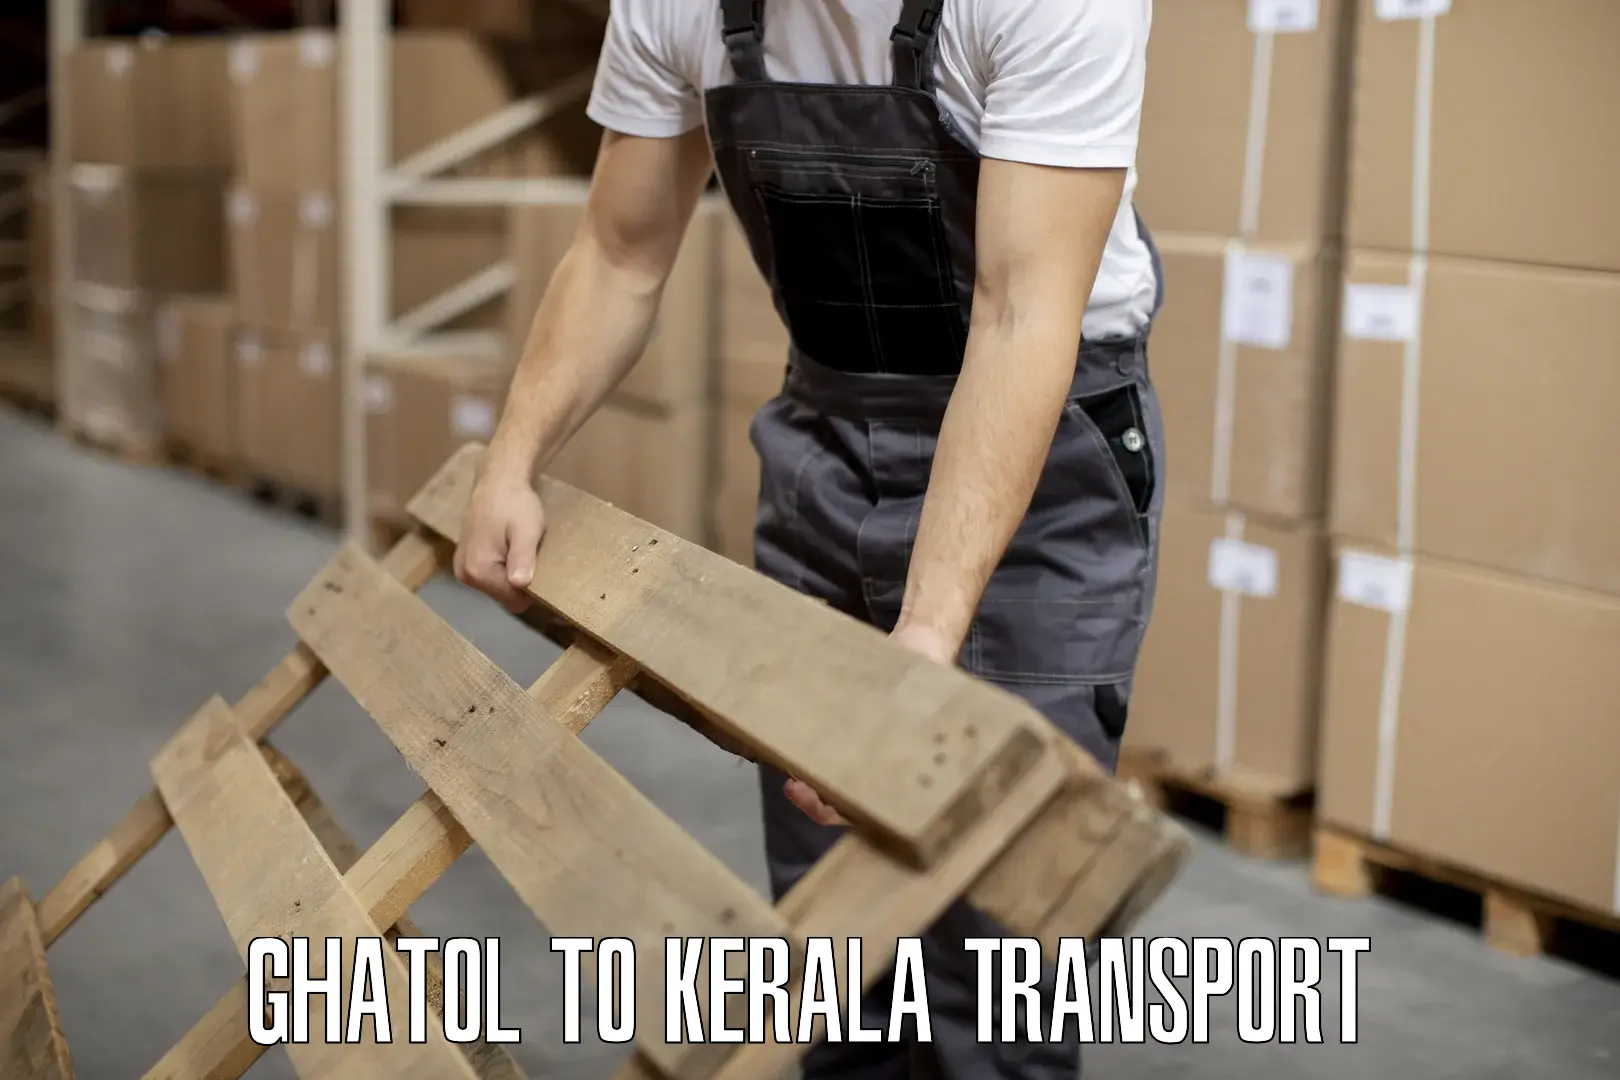 Daily parcel service transport Ghatol to Kozhikode